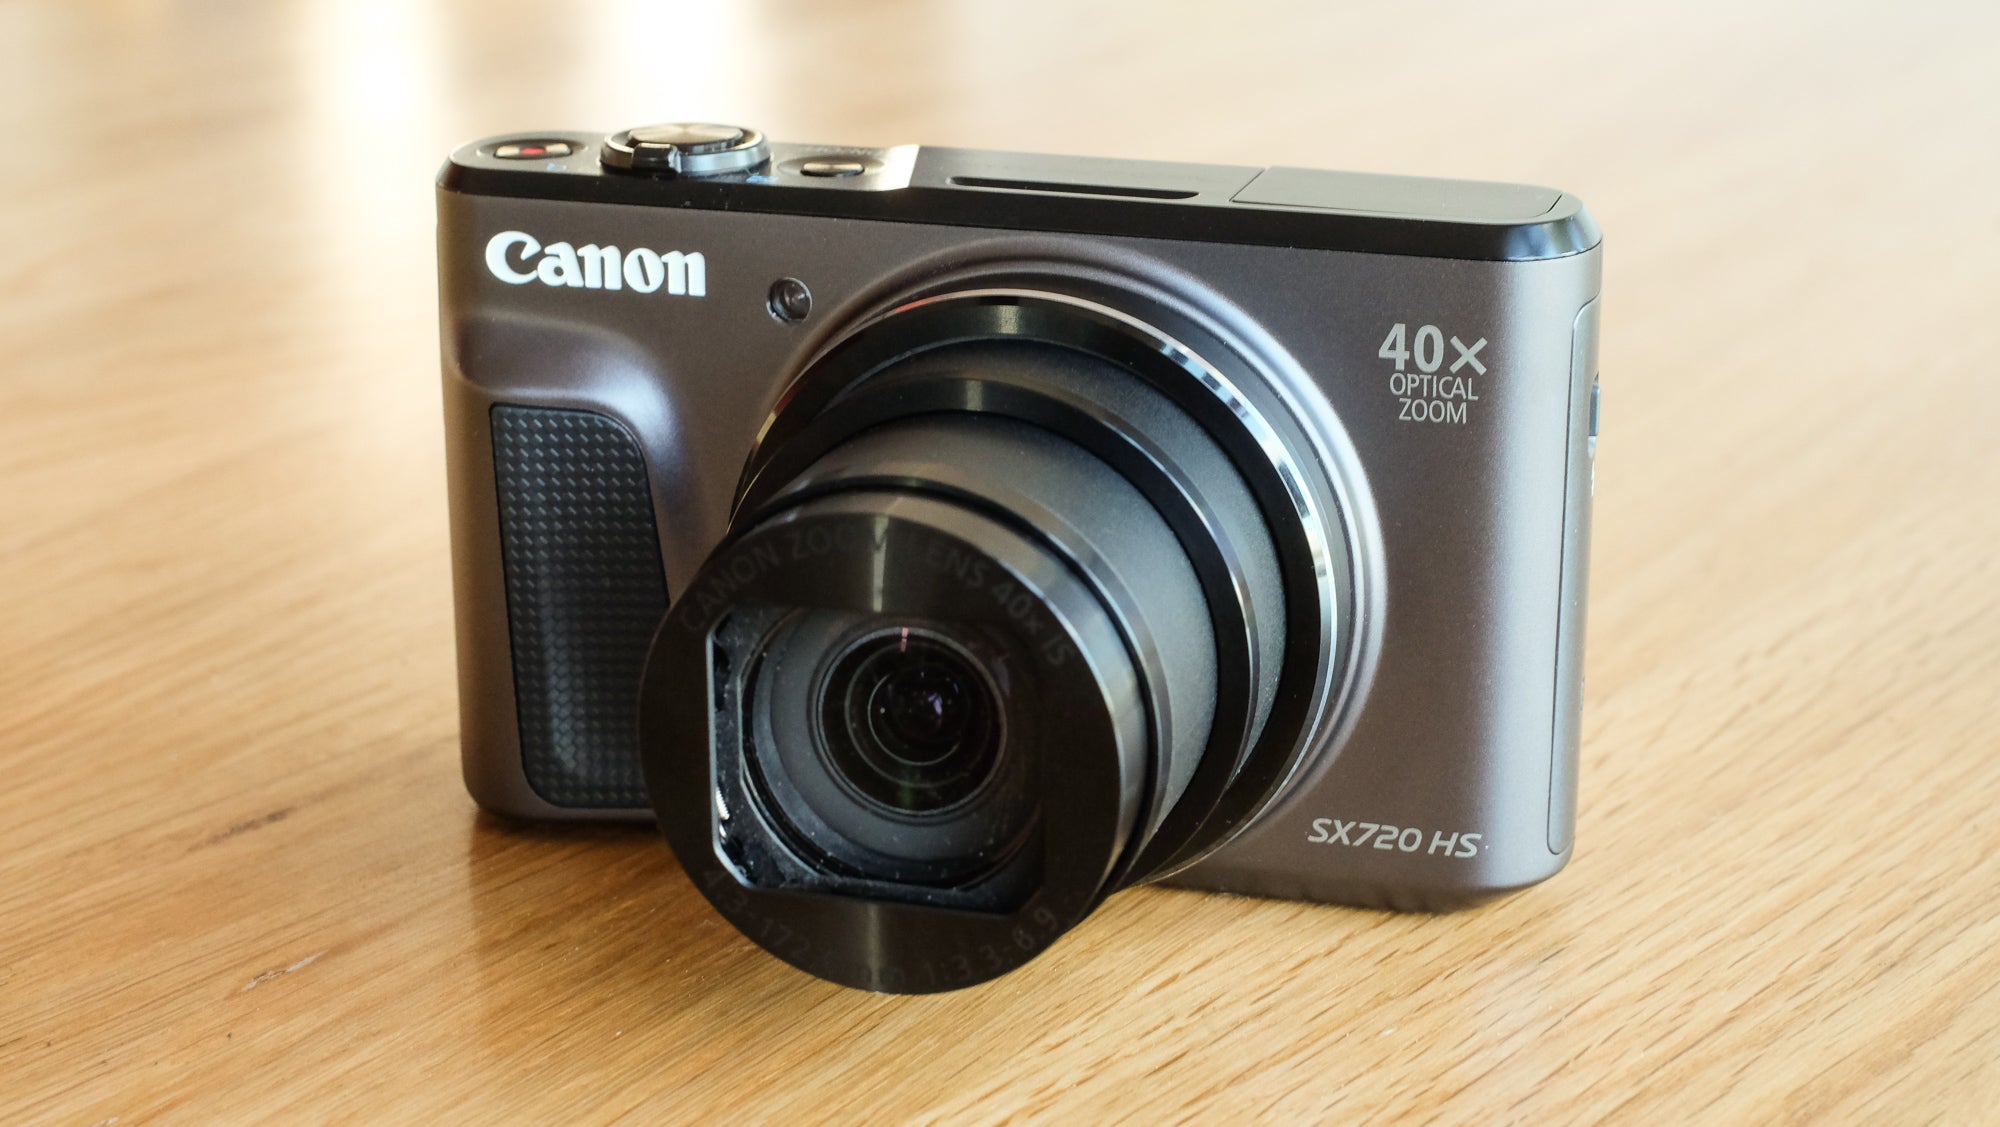 Canon SX720 HS review - biggest ever 40x zoom in a compact